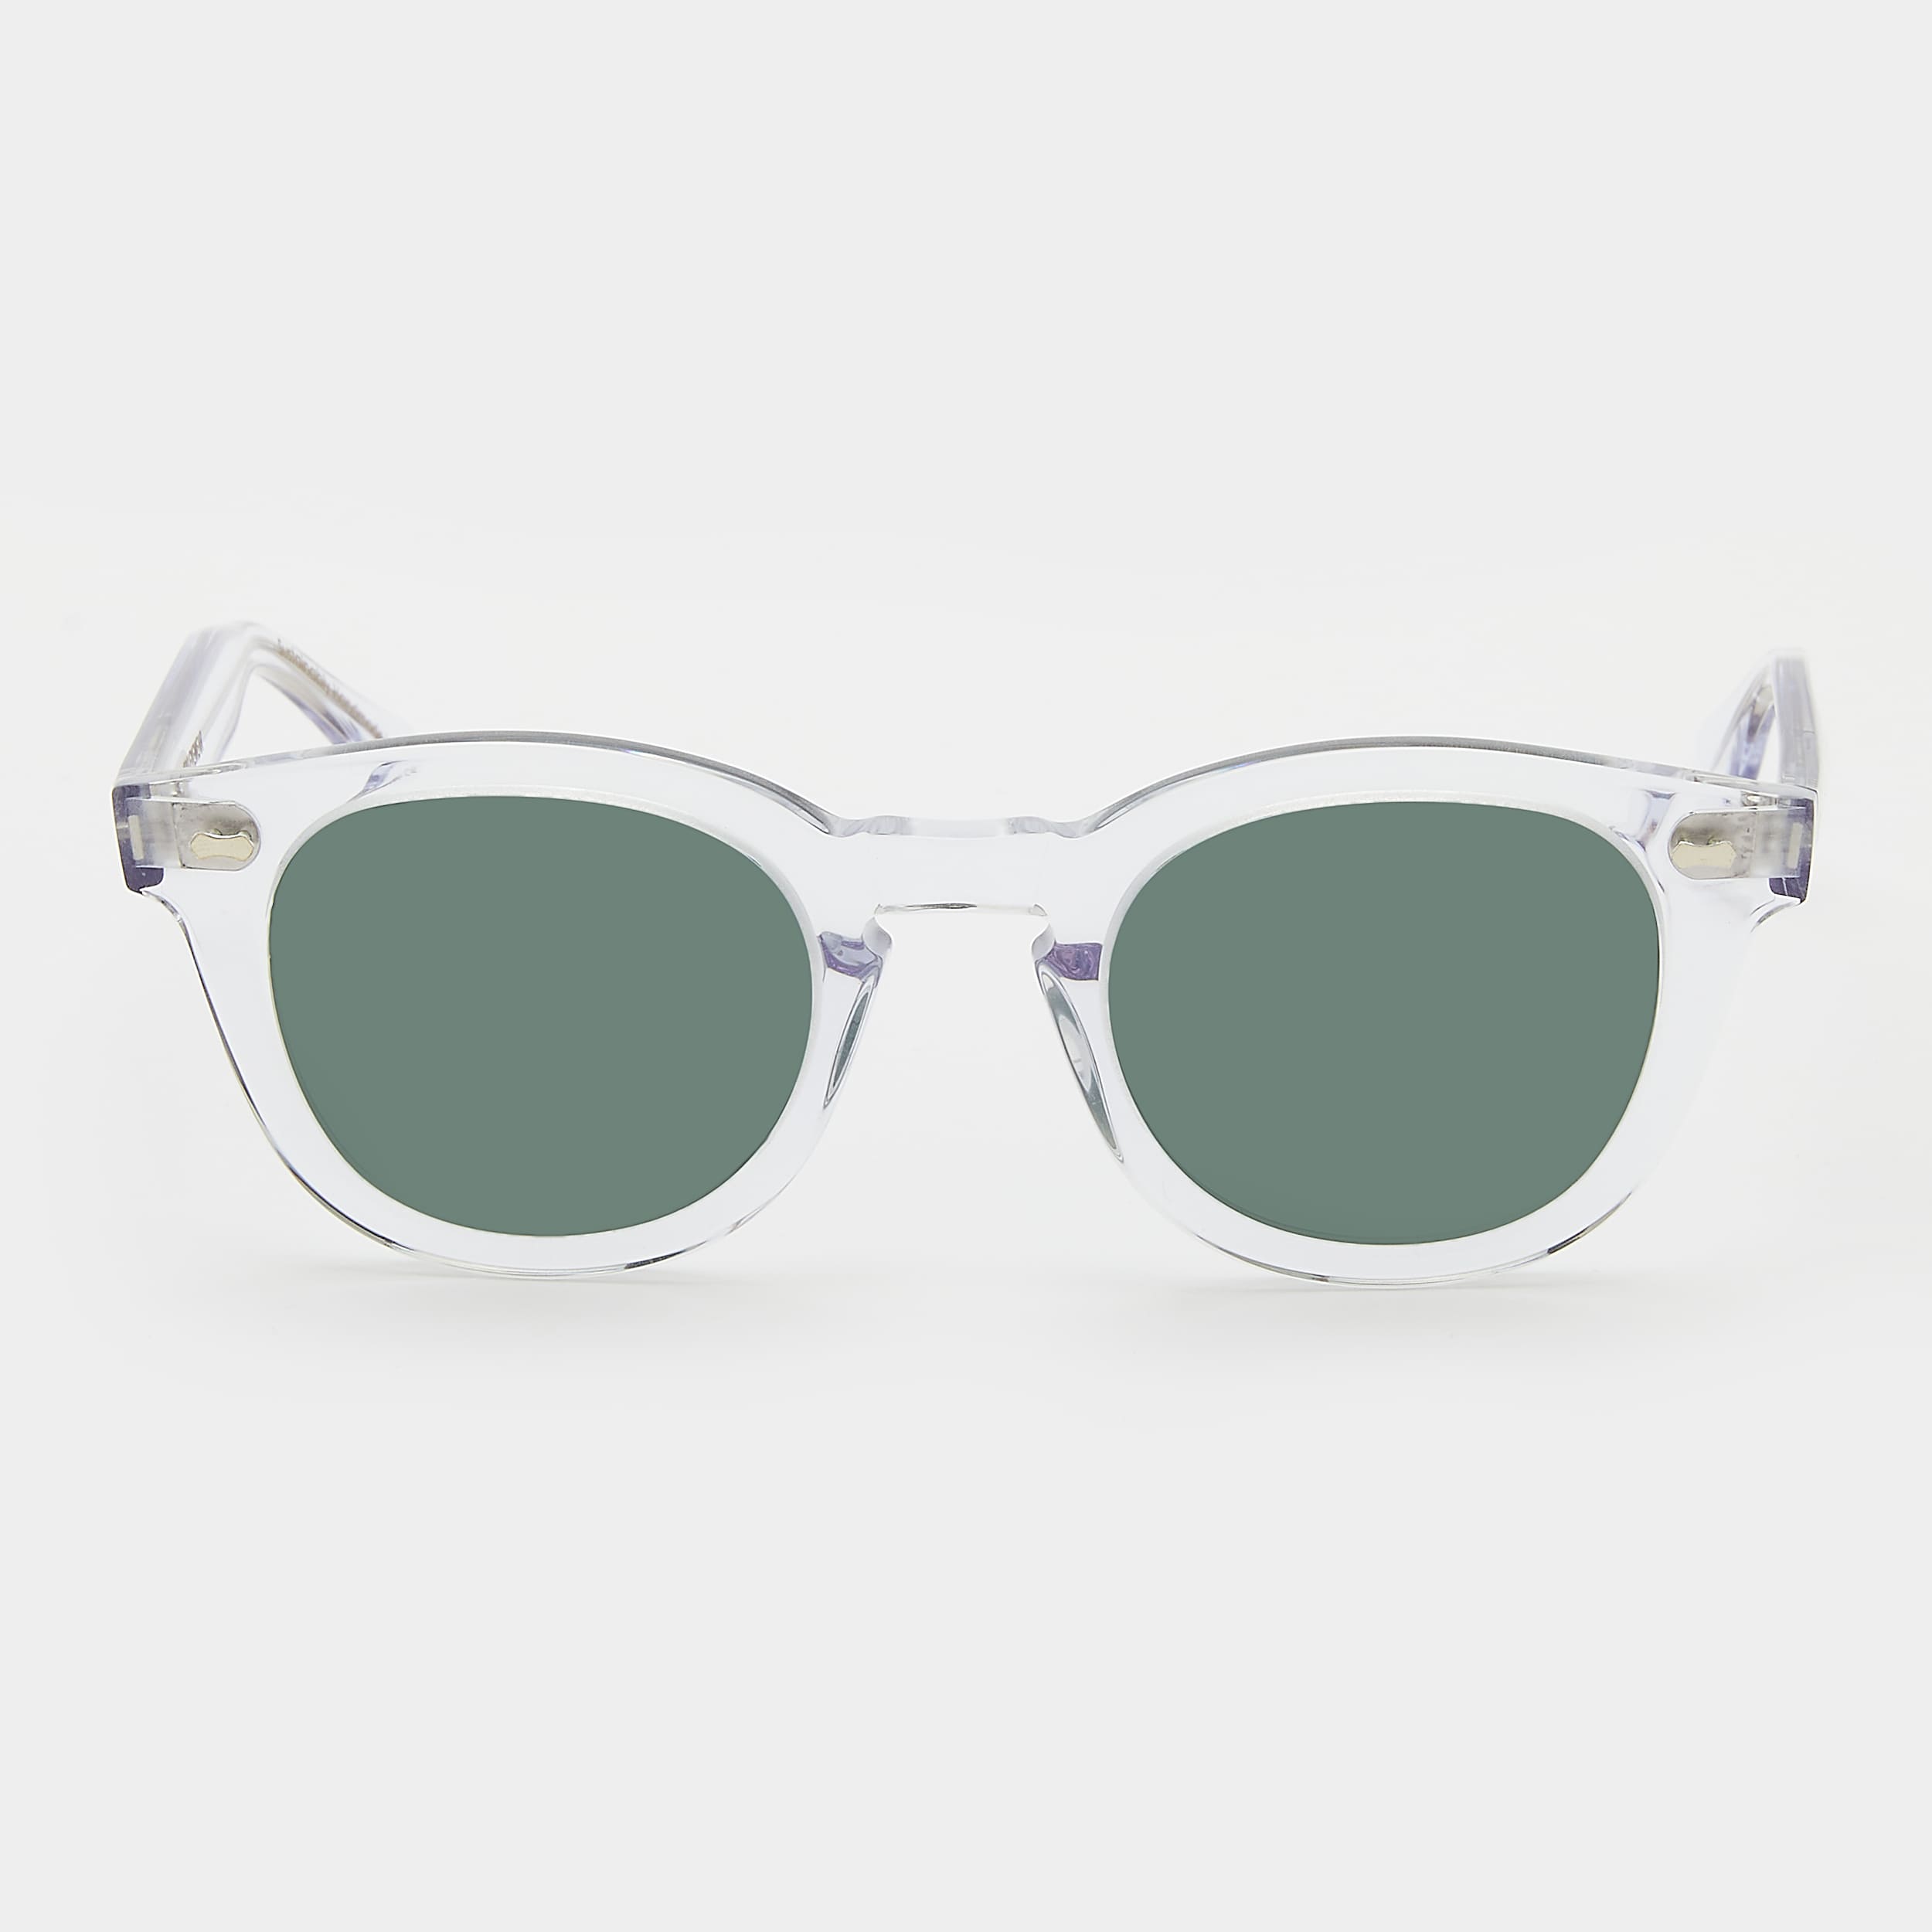 sunglasses-donegal-eco-transparent-bottle-green-sustainable-tbd-eyewear-front